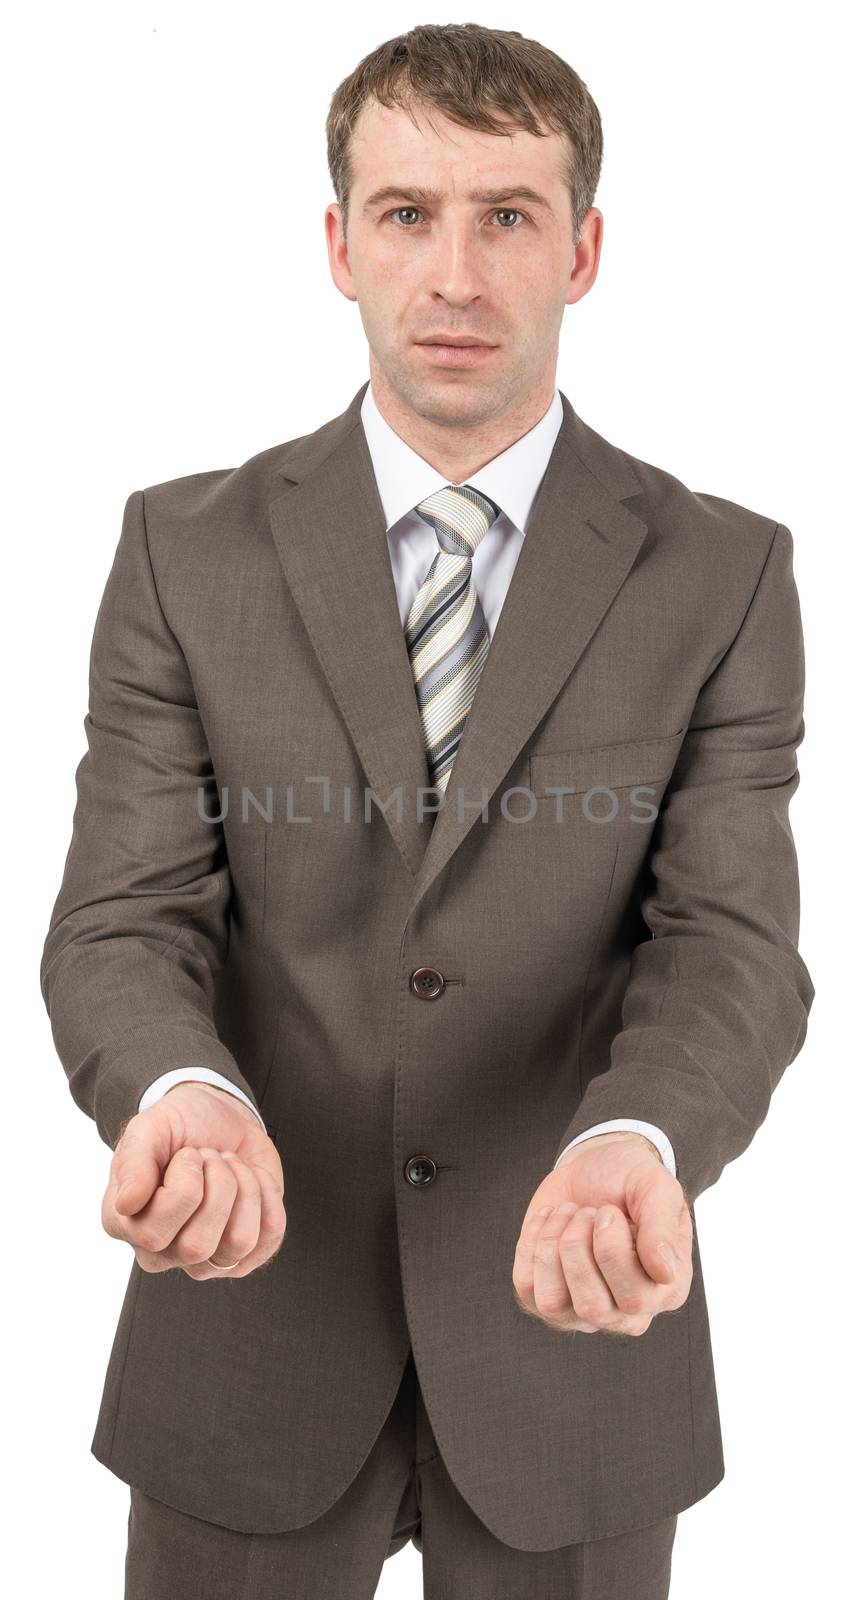 Businessman holding hands in front of him and looking at camera